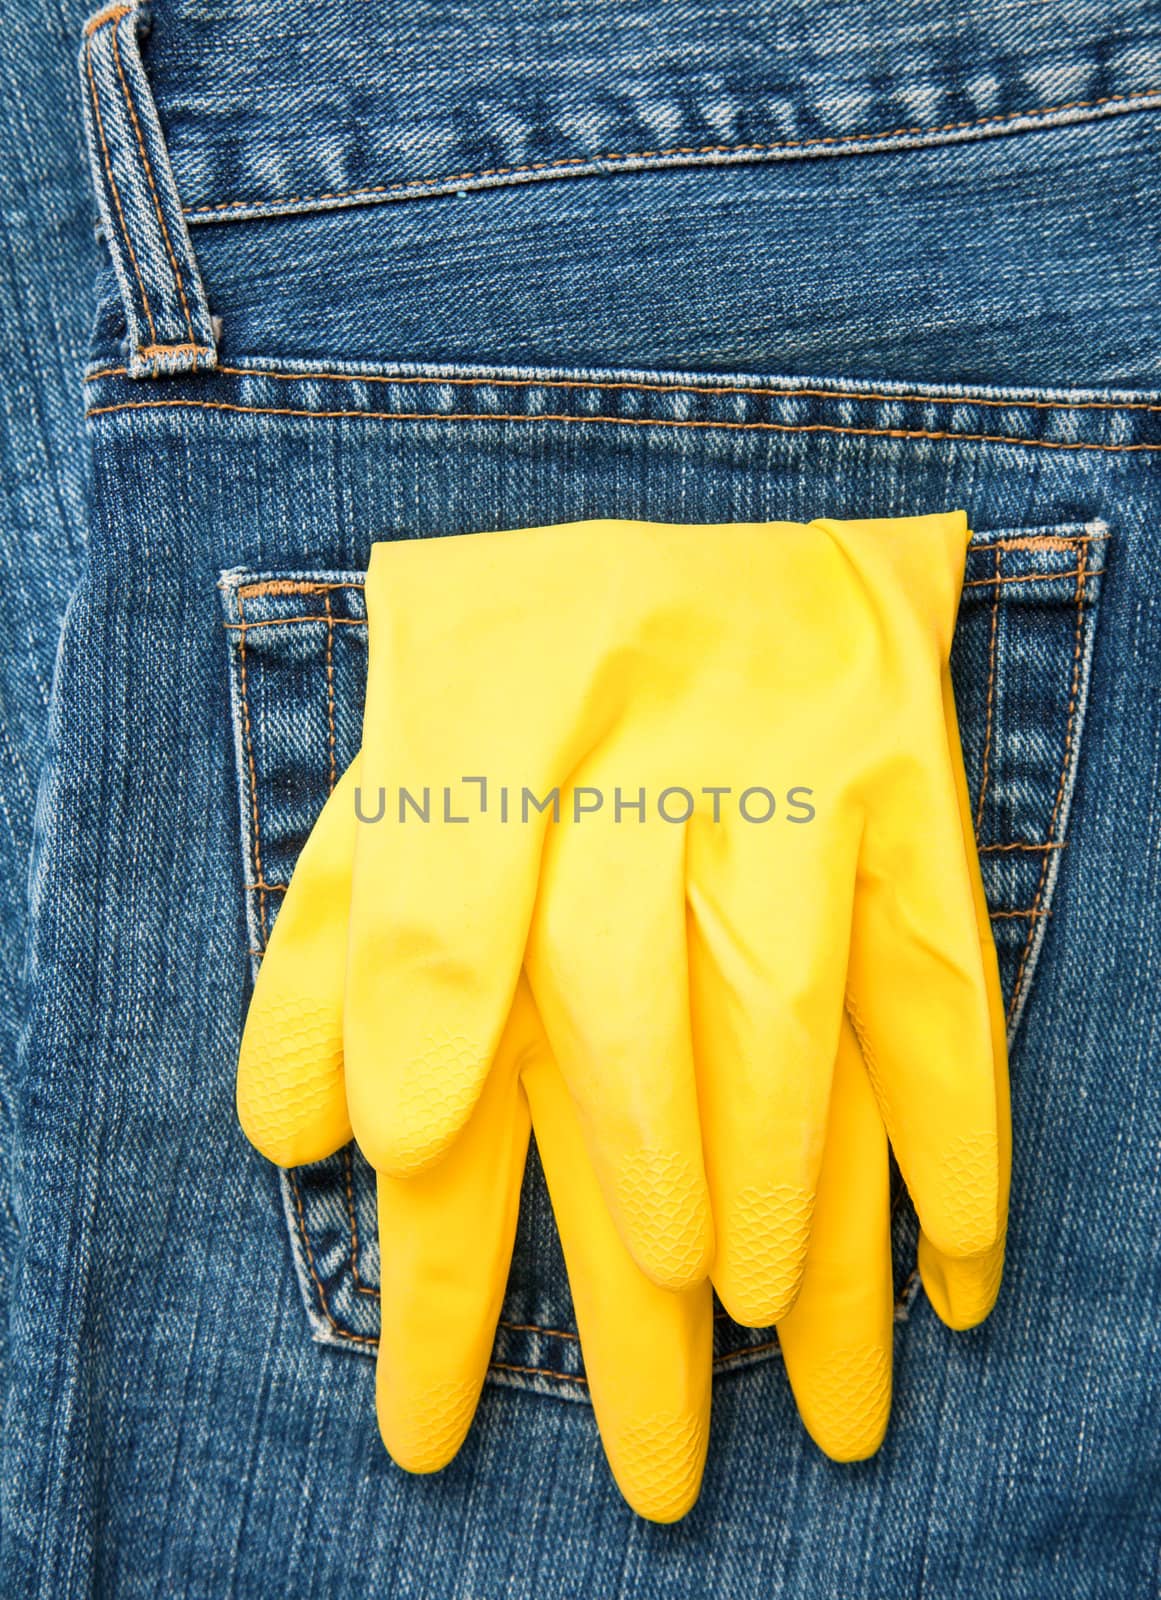 Gloves in a pocket by naumoid